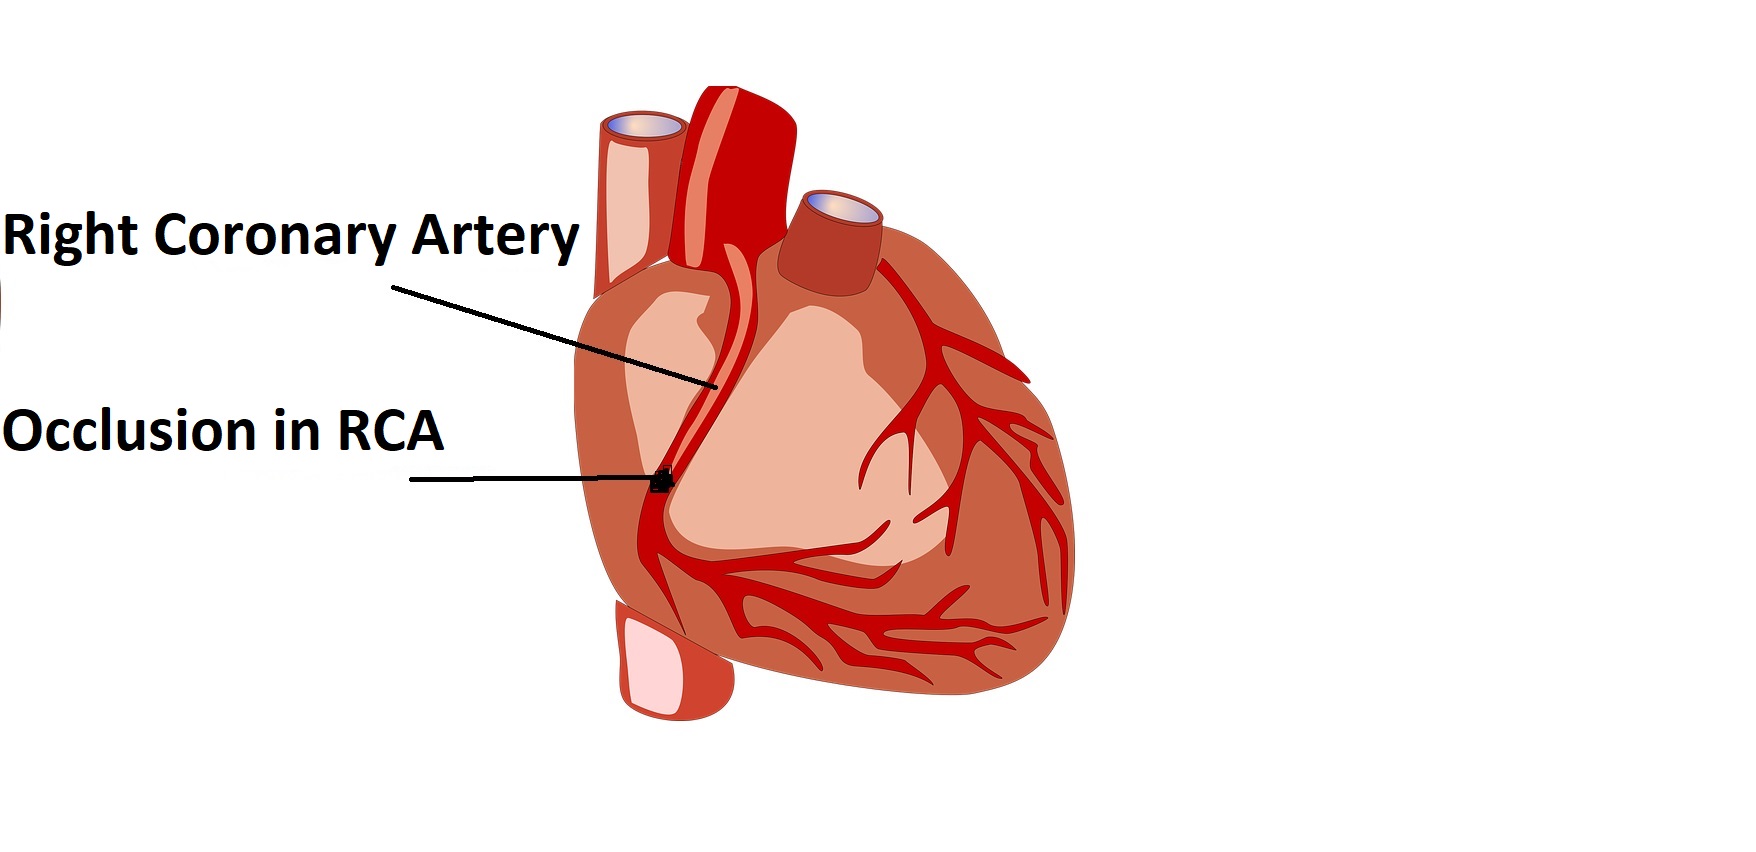 “Right Coronary Artery Blockage: Causes, Symptoms, and Treatment Options”